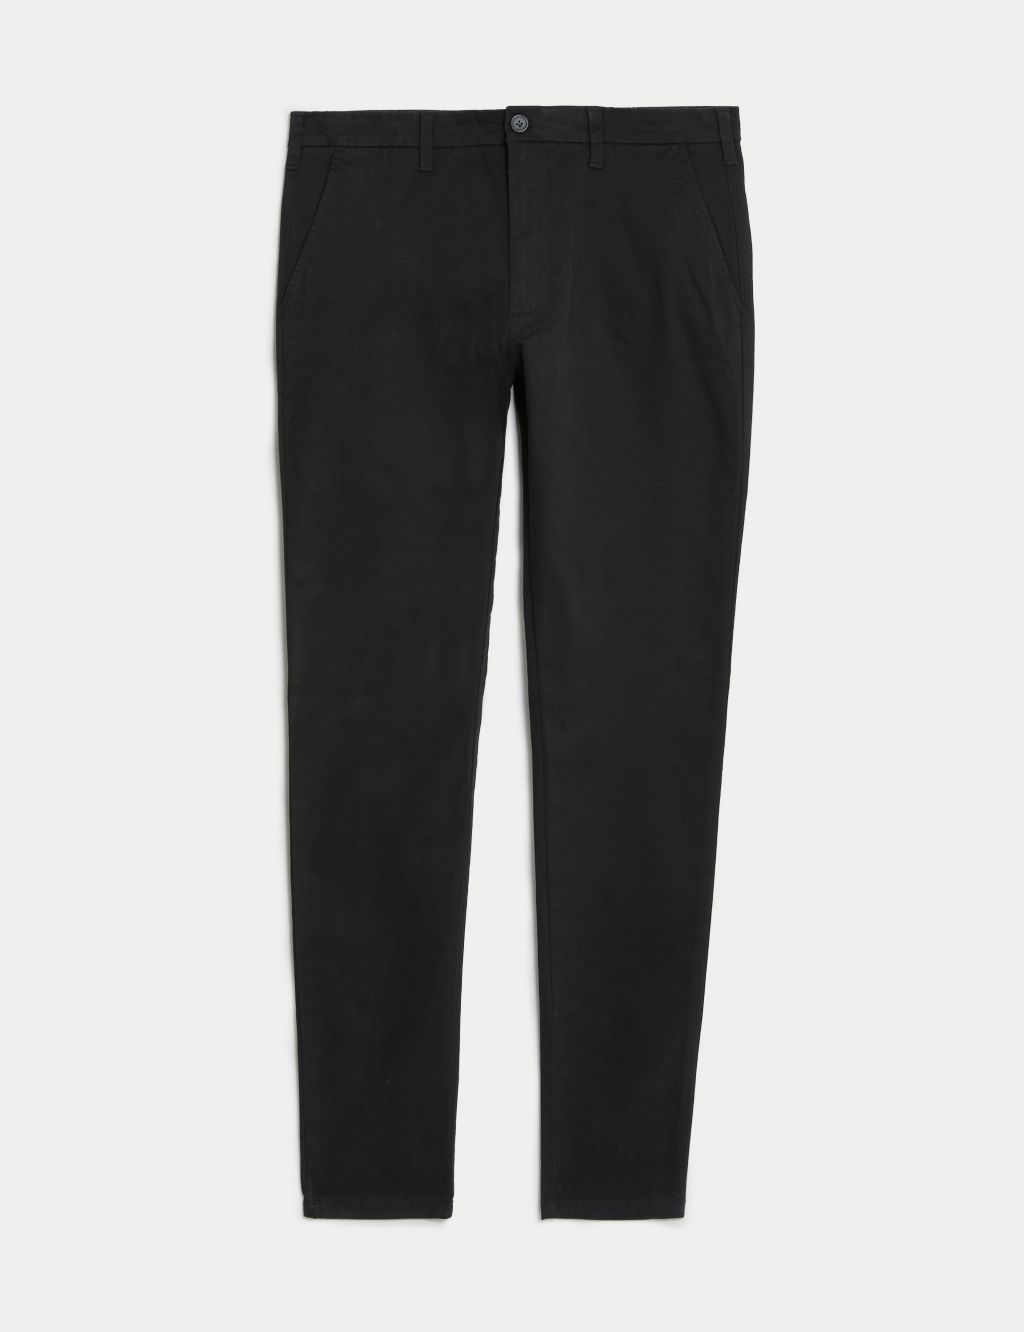 Skinny Fit Stretch Chinos | M&S Collection | M&S